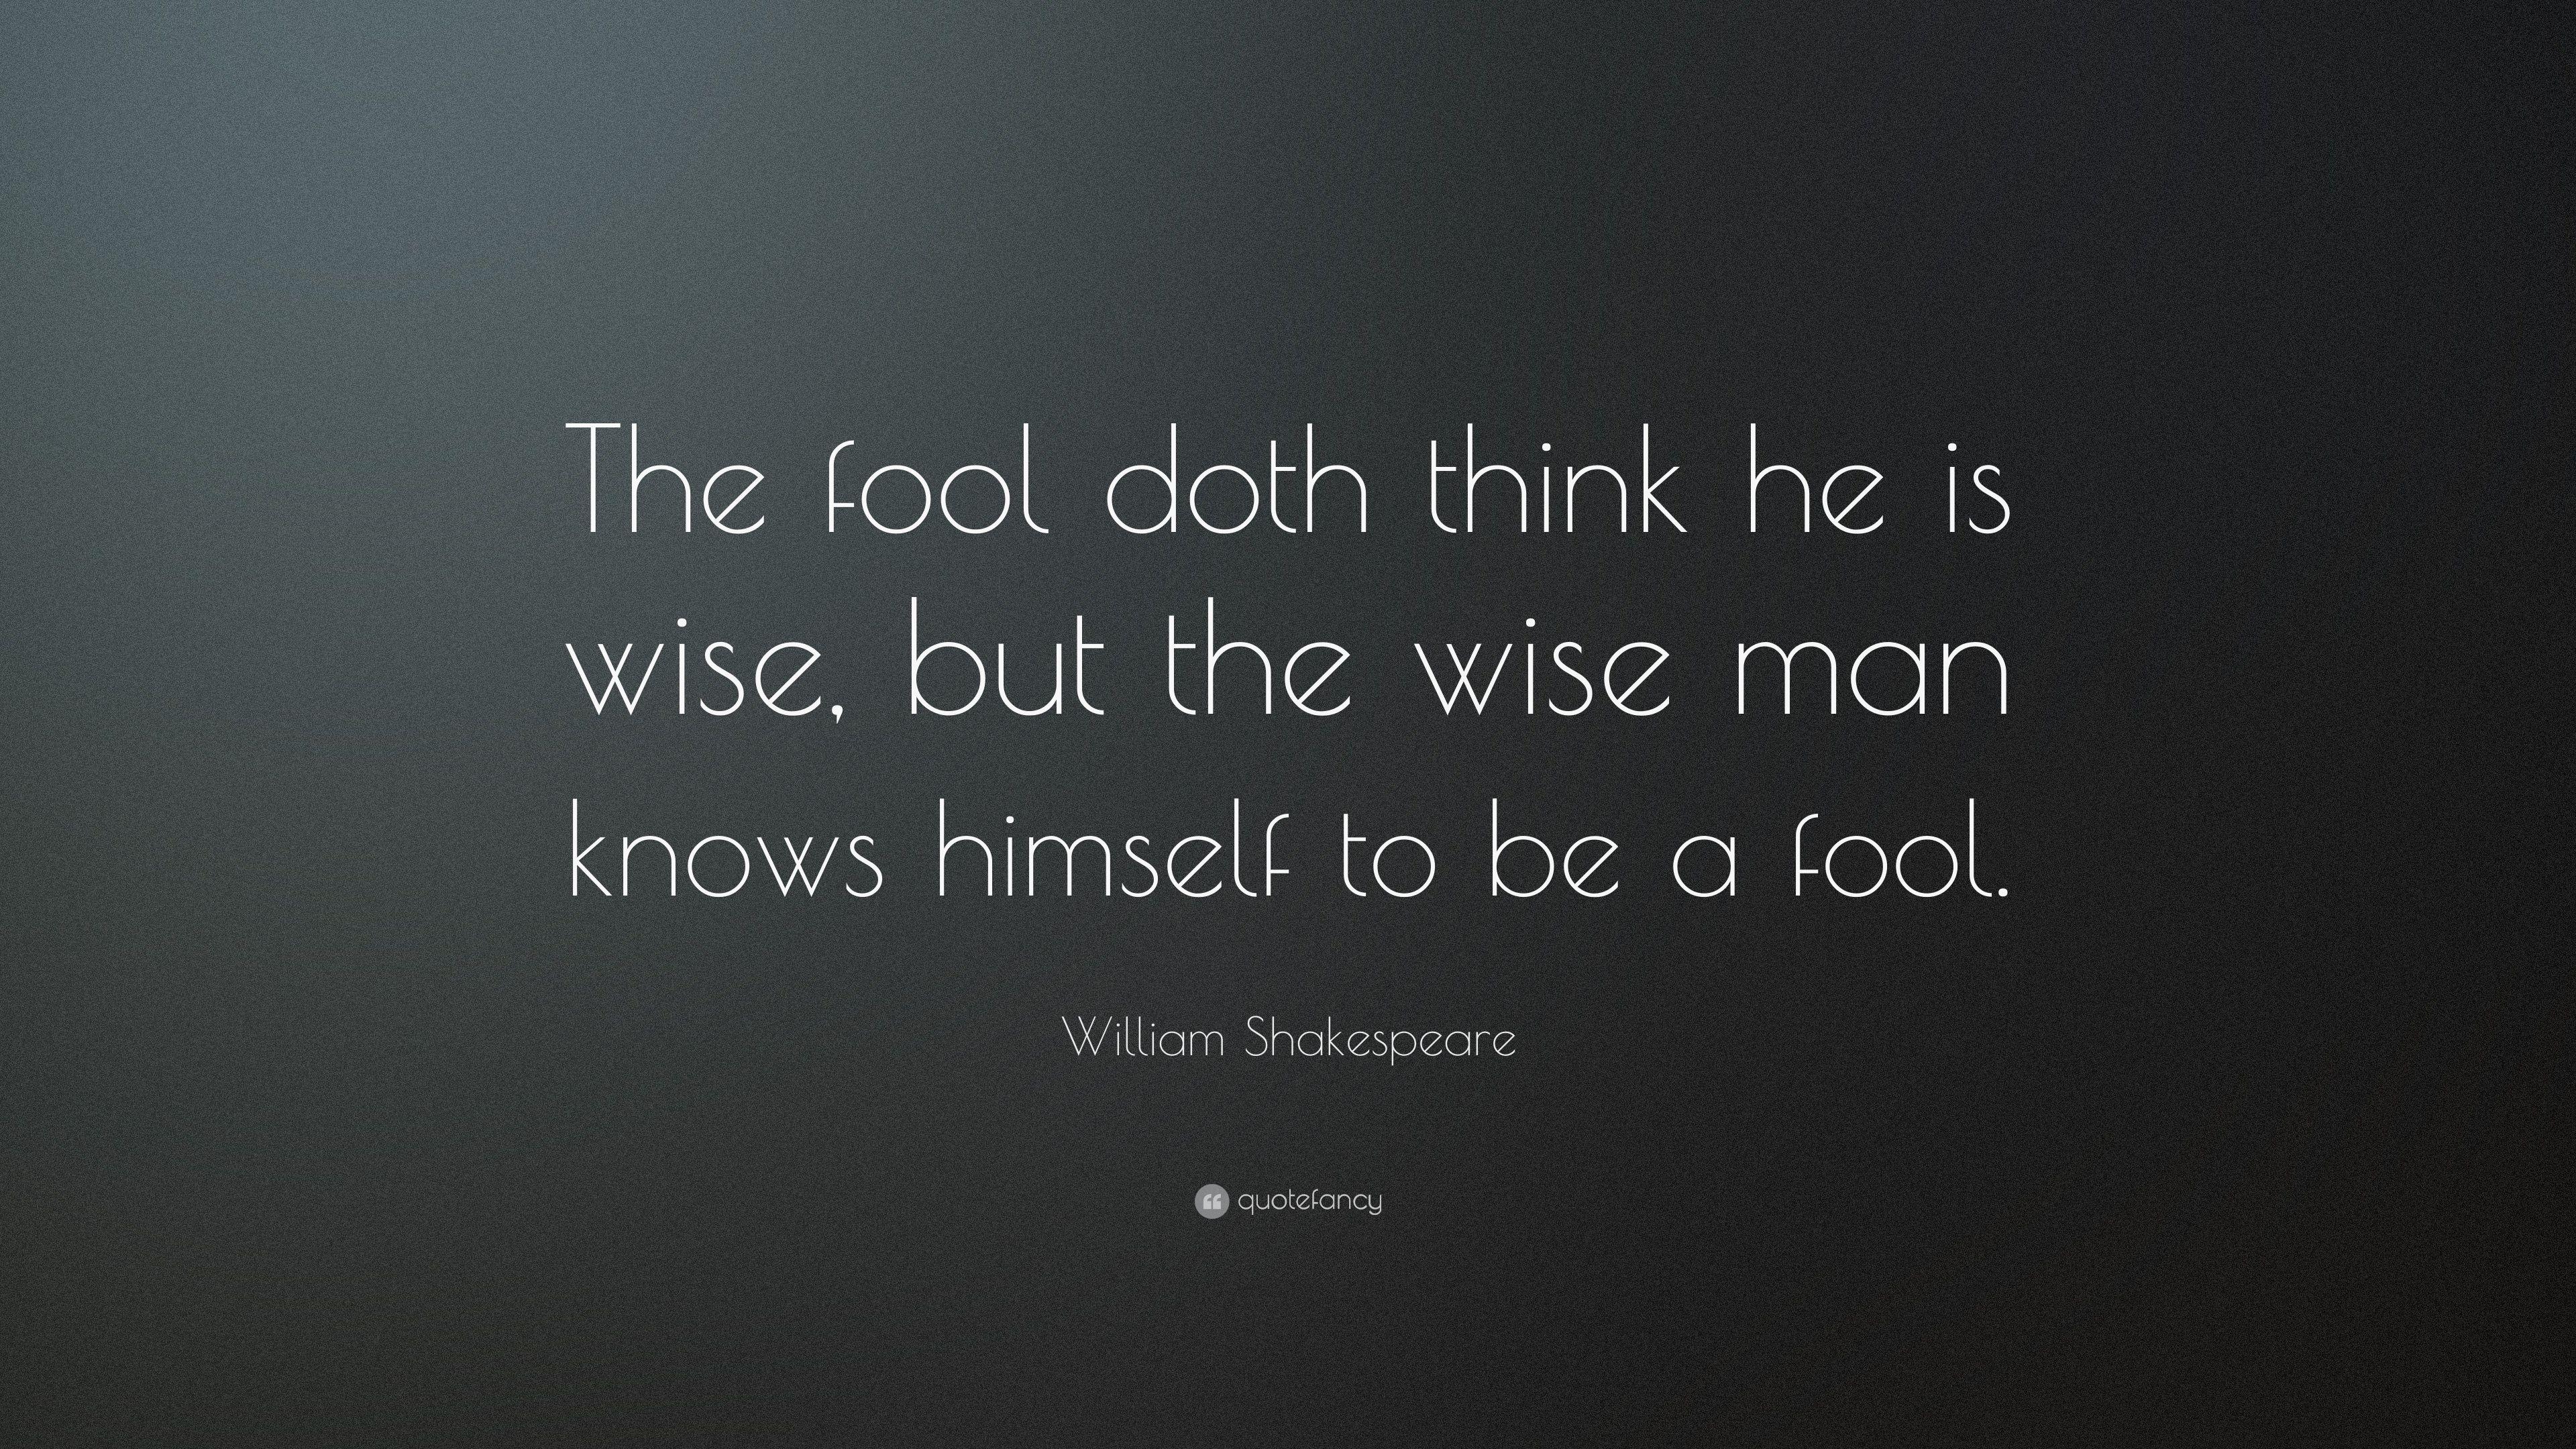 William Shakespeare Quote: “The fool doth think he is wise